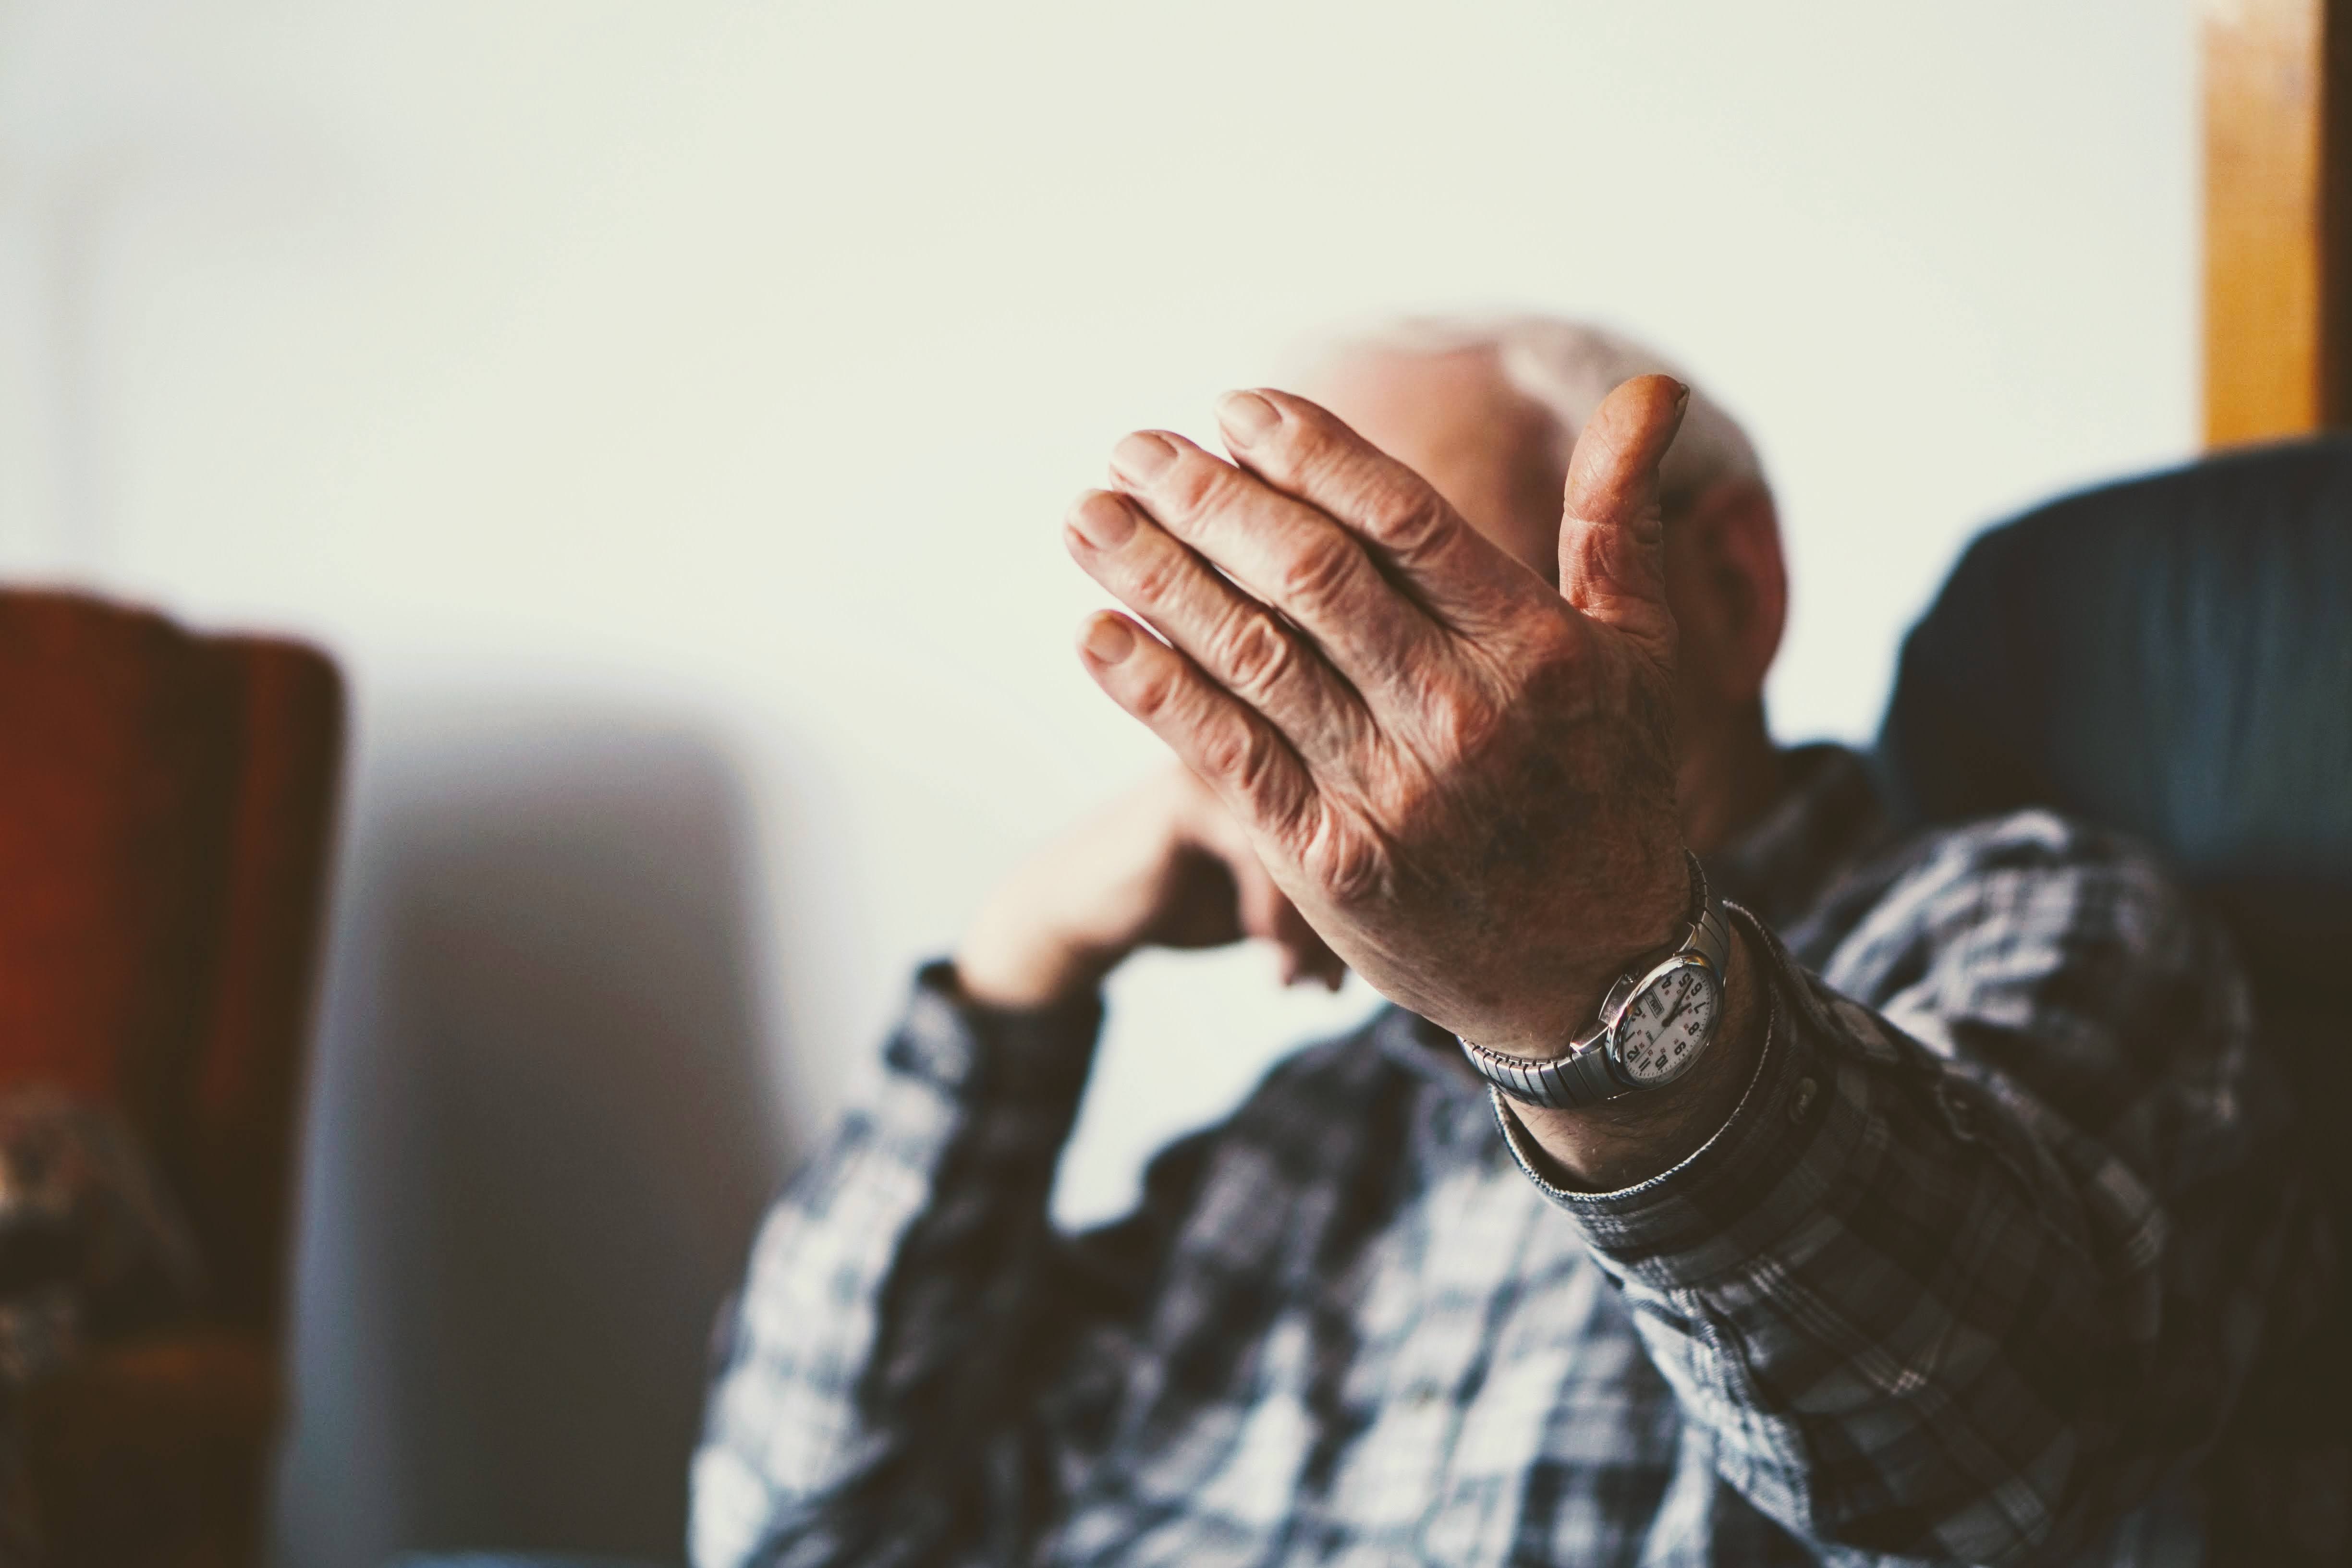 Older people with positive views of aging perform better on hearing tests and memory tasks and are less likely to develop psychiatric illnesses like anxiety, depression, post-traumatic stress disorder and suicidal thoughts.